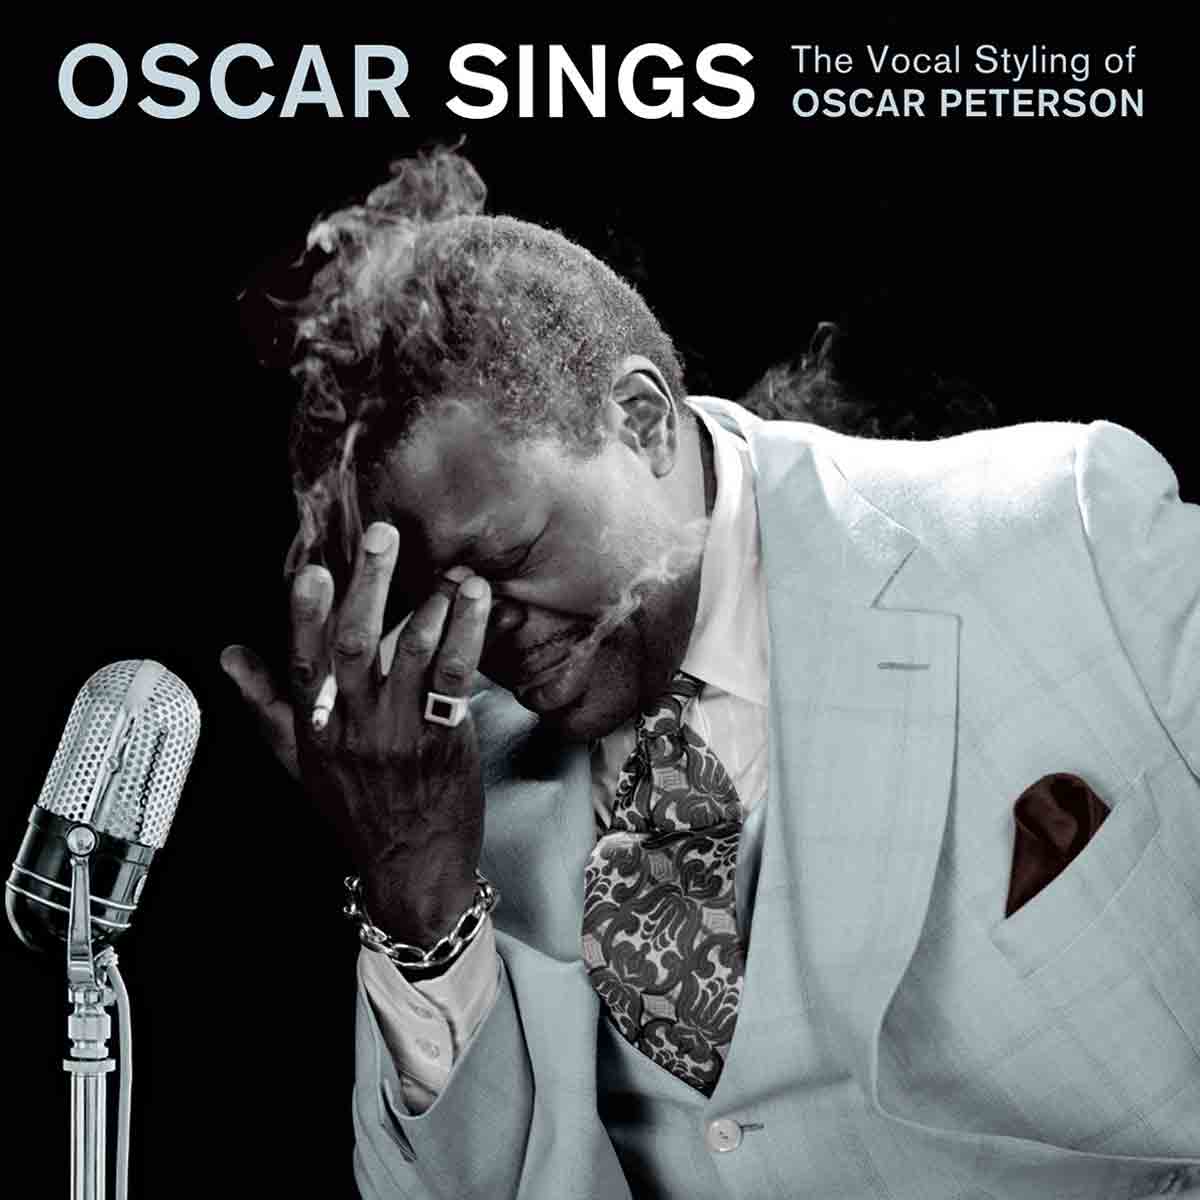 The Vocal Styling of Oscar Peterson